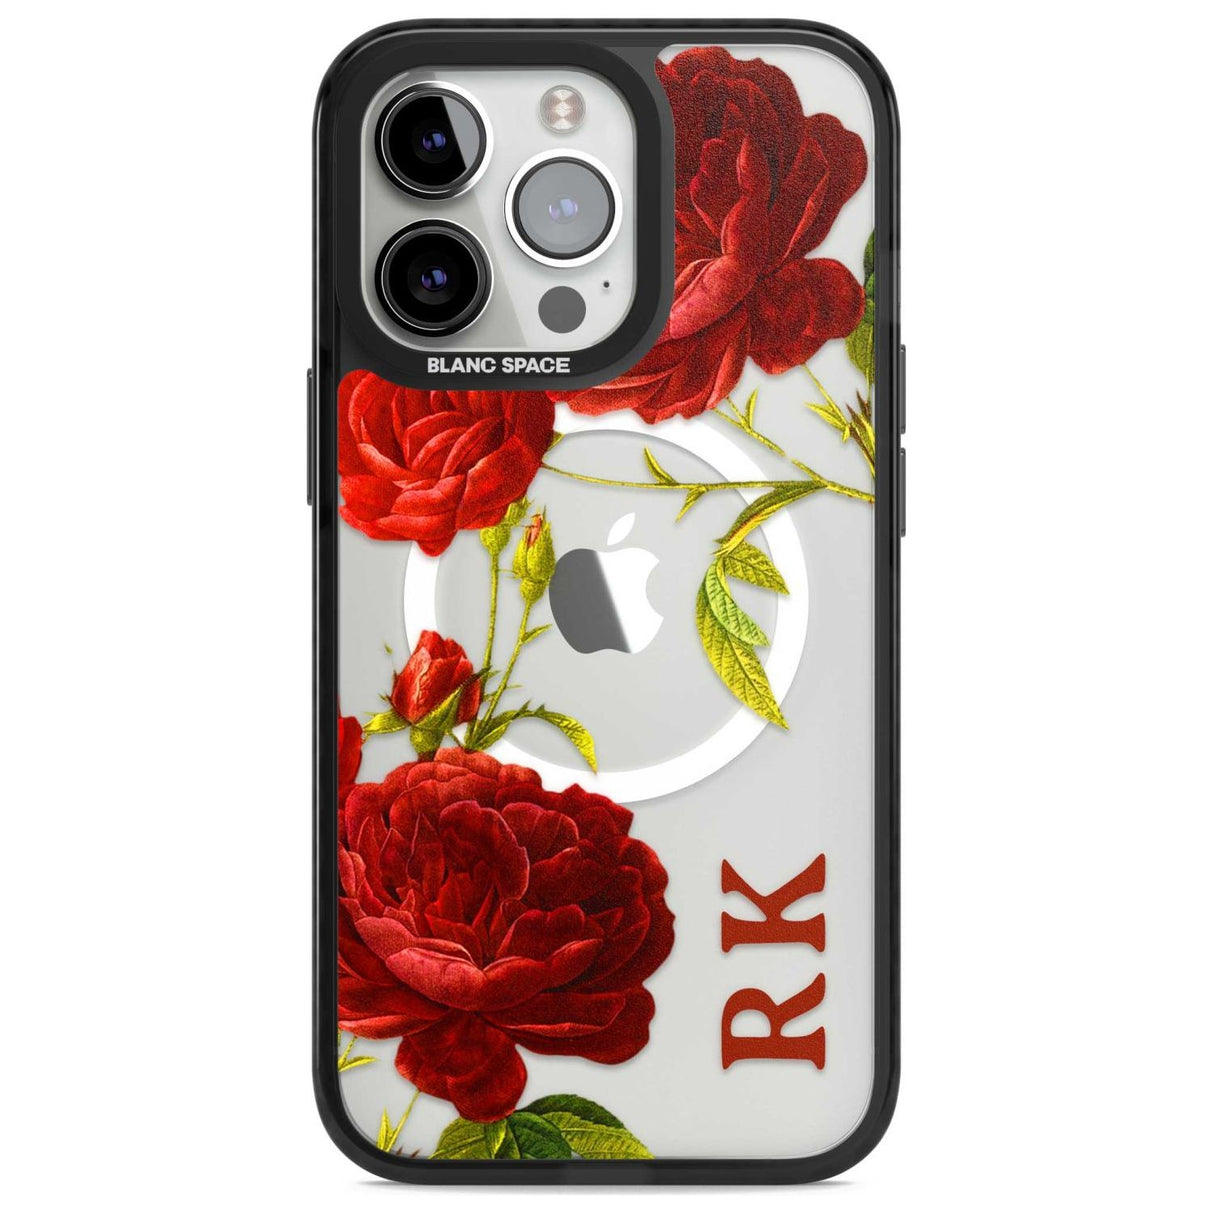 Personalised Clear Vintage Floral Red Roses Custom Phone Case iPhone 15 Pro Max / Magsafe Black Impact Case,iPhone 15 Pro / Magsafe Black Impact Case,iPhone 14 Pro Max / Magsafe Black Impact Case,iPhone 14 Pro / Magsafe Black Impact Case,iPhone 13 Pro / Magsafe Black Impact Case Blanc Space